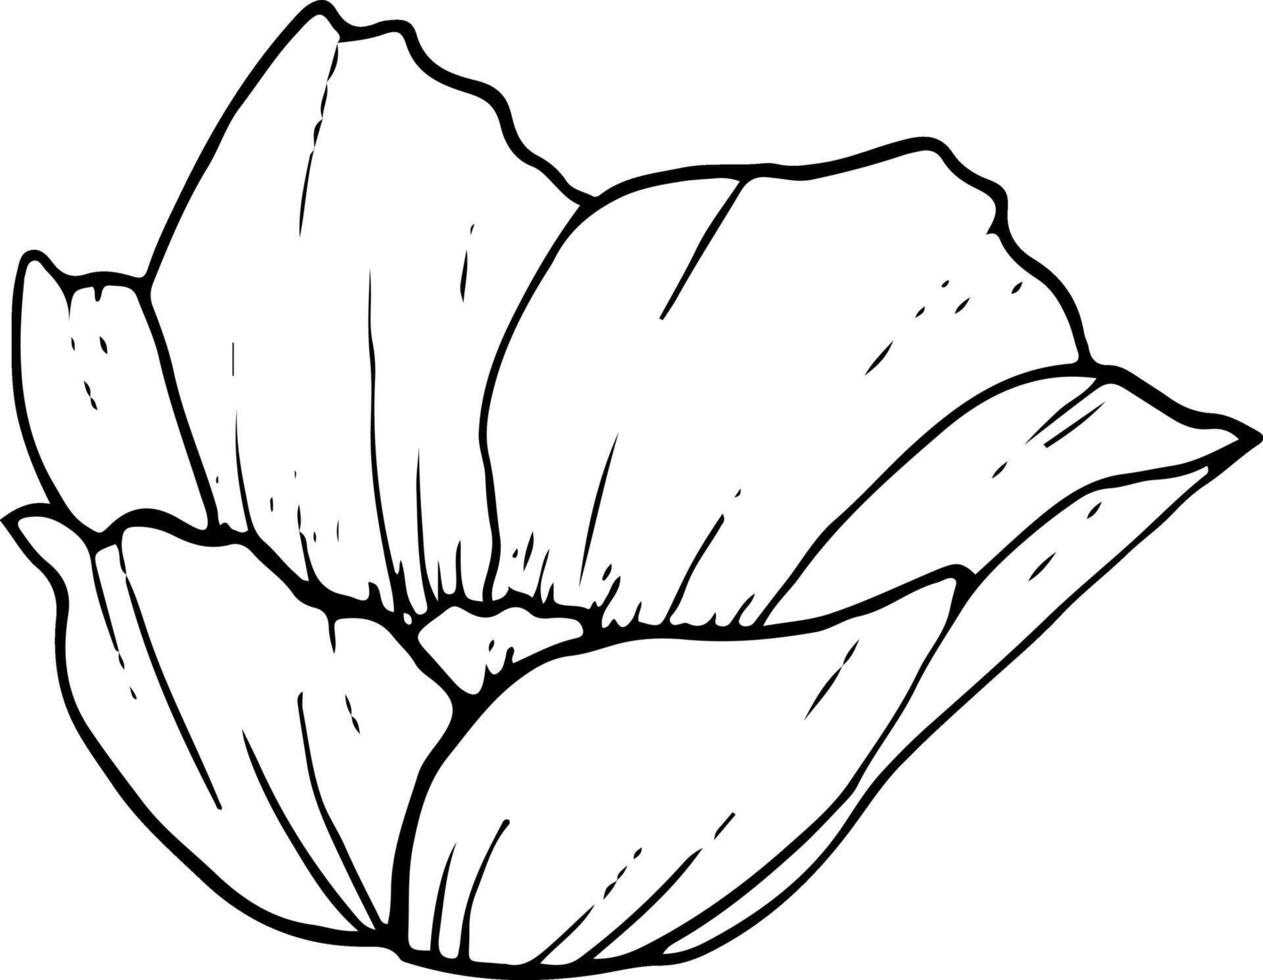 Field anemone black and white graphic illustration. Spring flower for coloring pages, greeting cards and wedding design vector